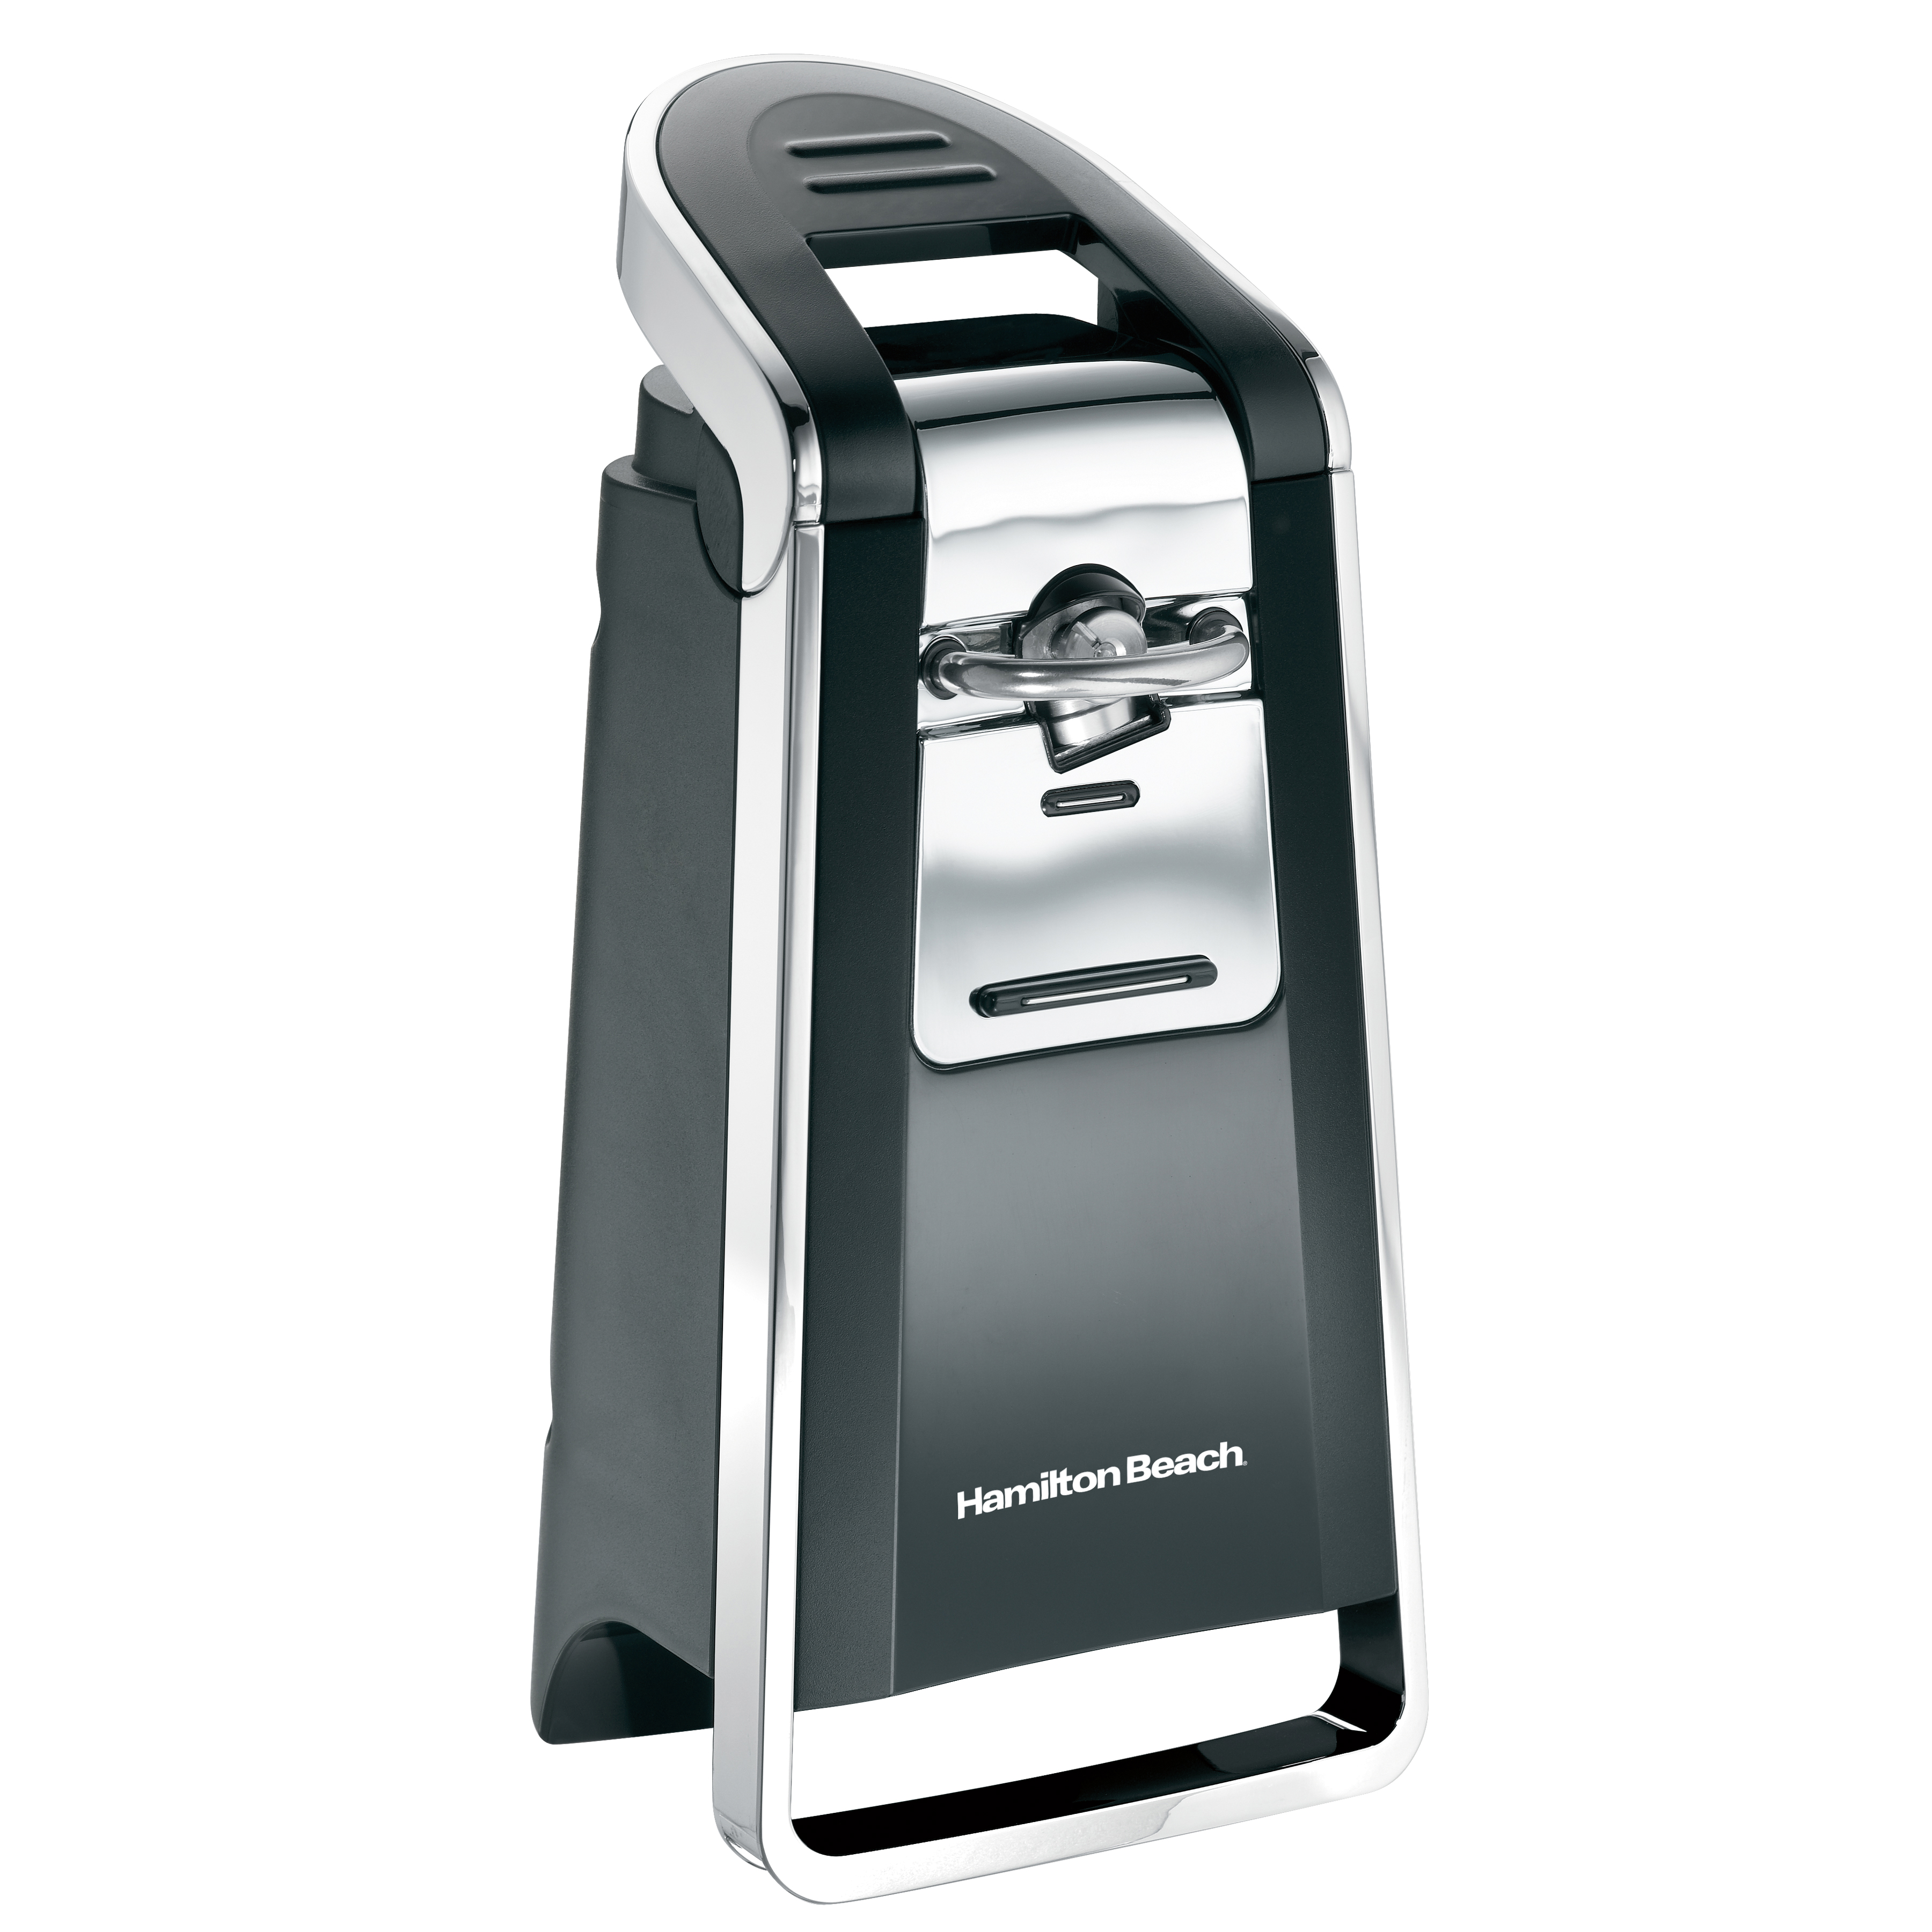 Hamilton Beach Smooth Touch Can Opener, Model 76606Z - image 1 of 10